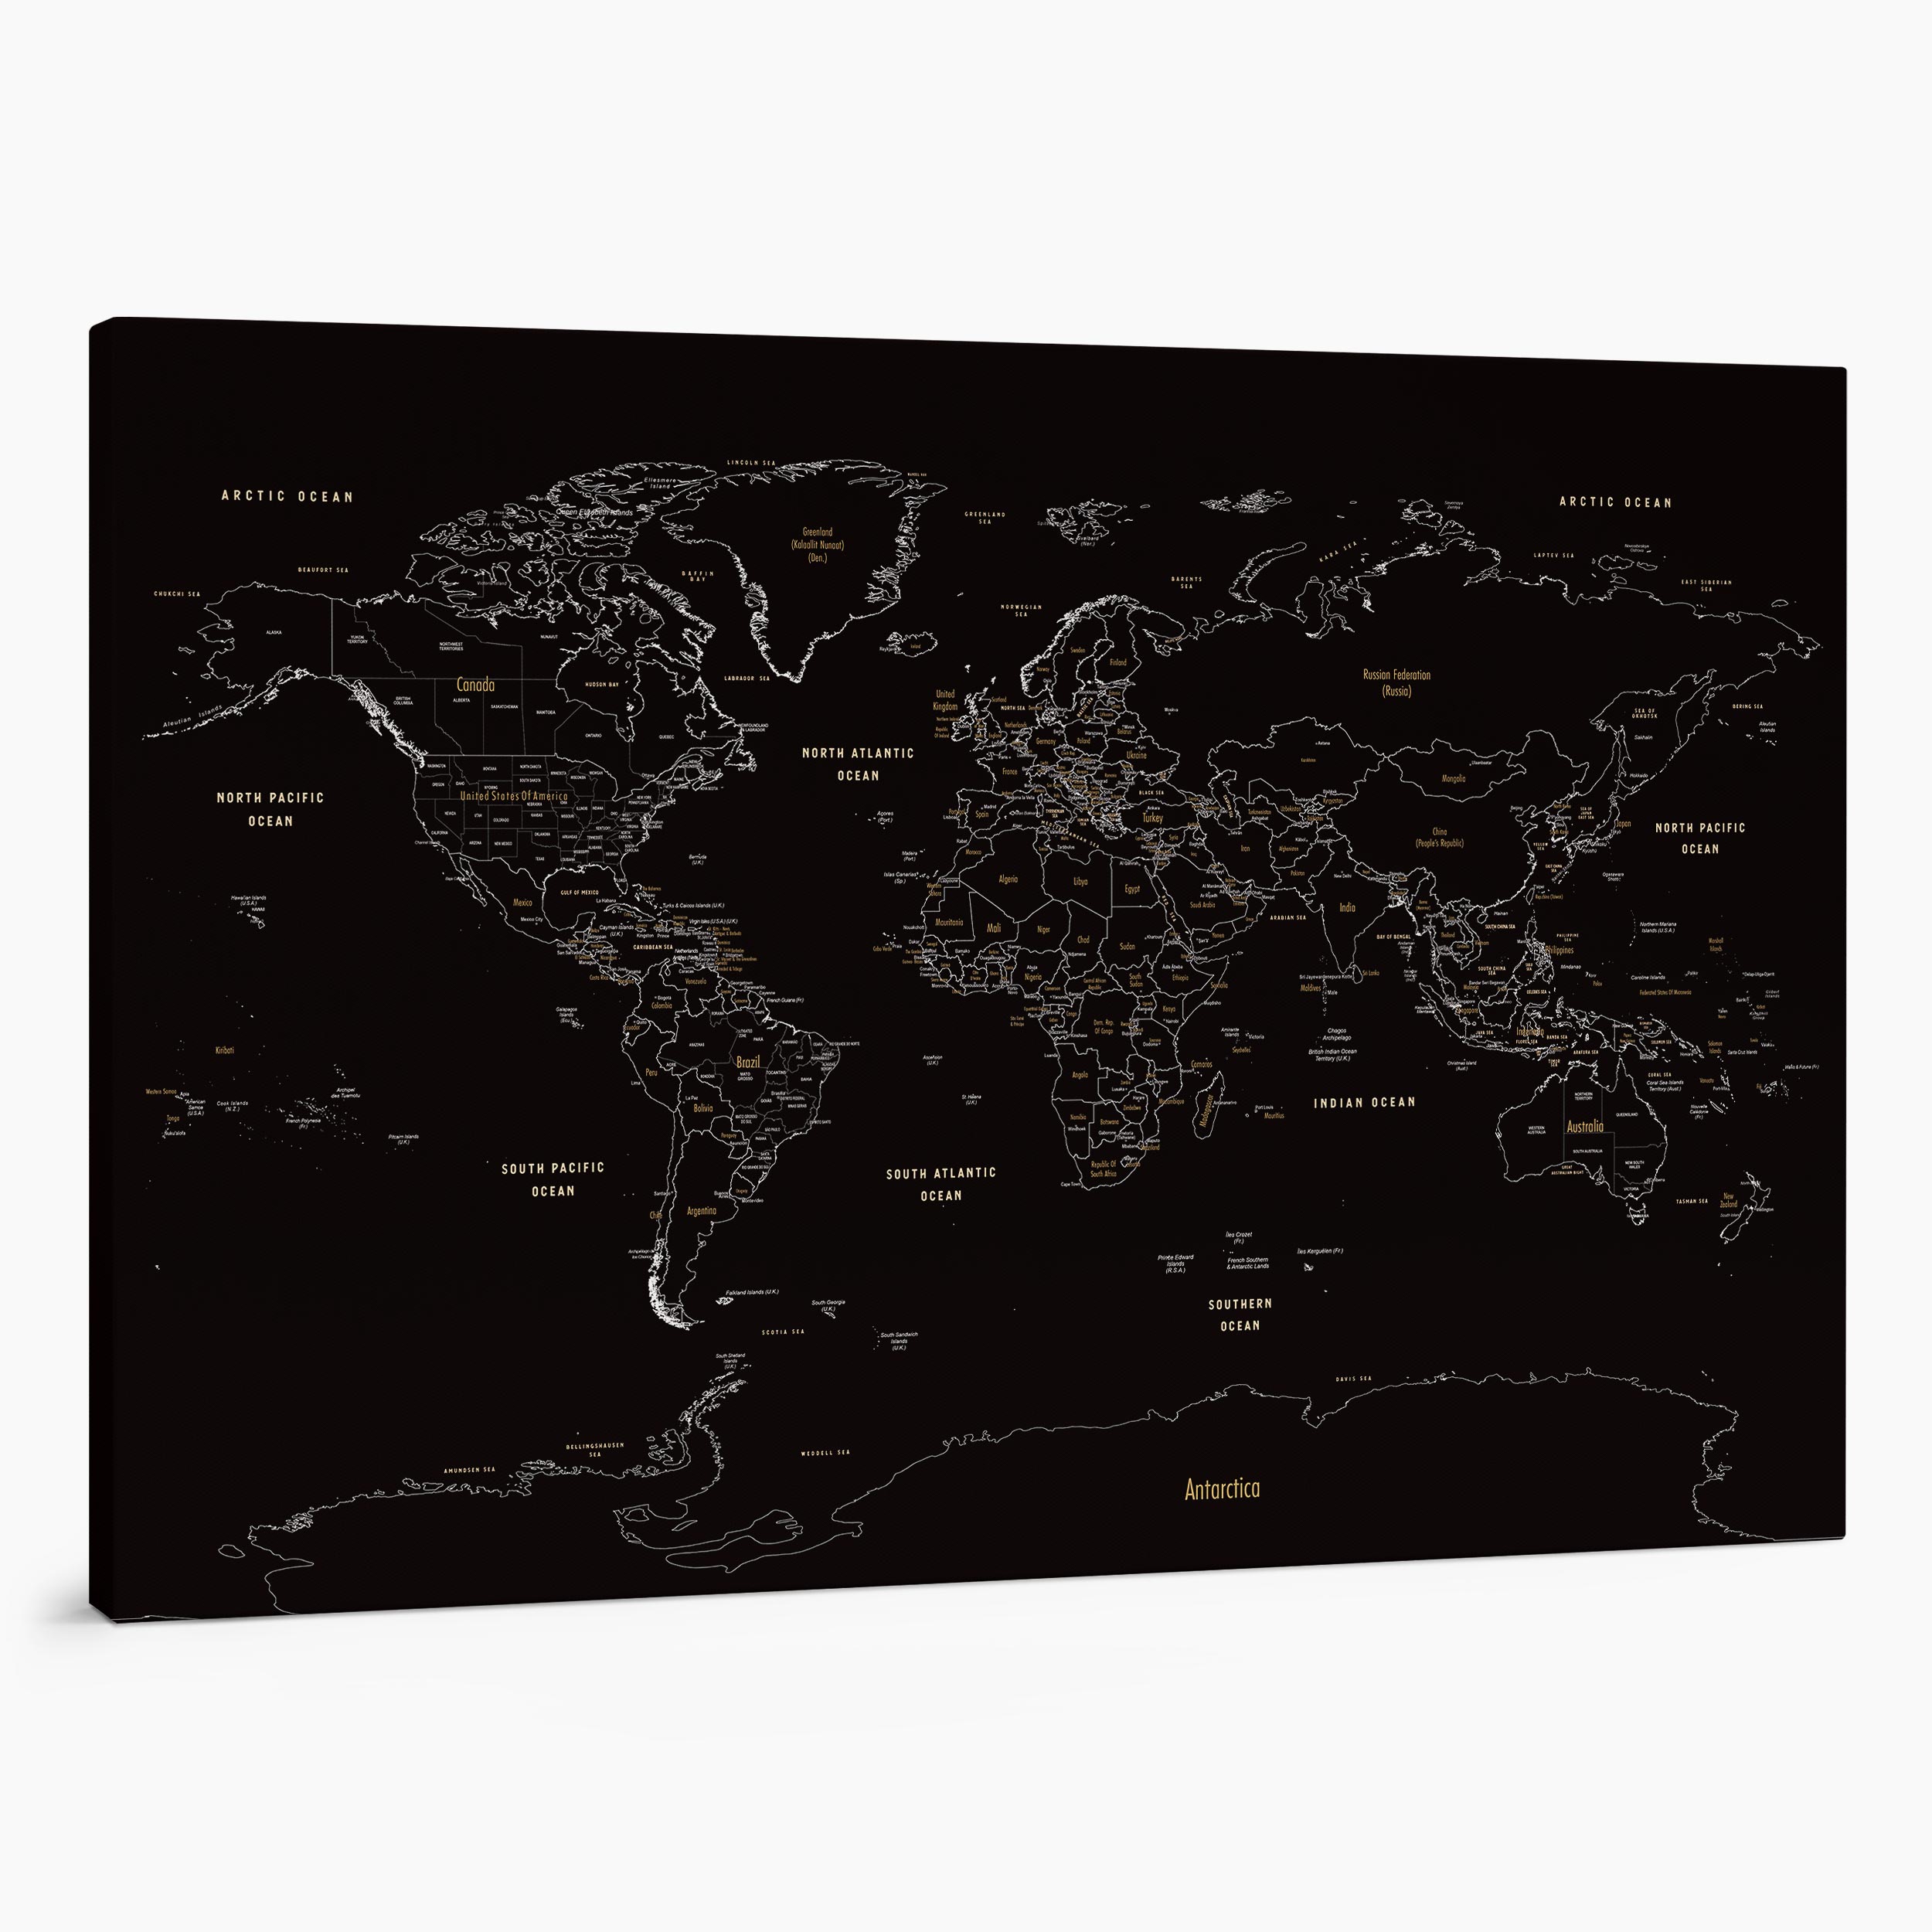 2MP small push pin world map to pin places you have visited black